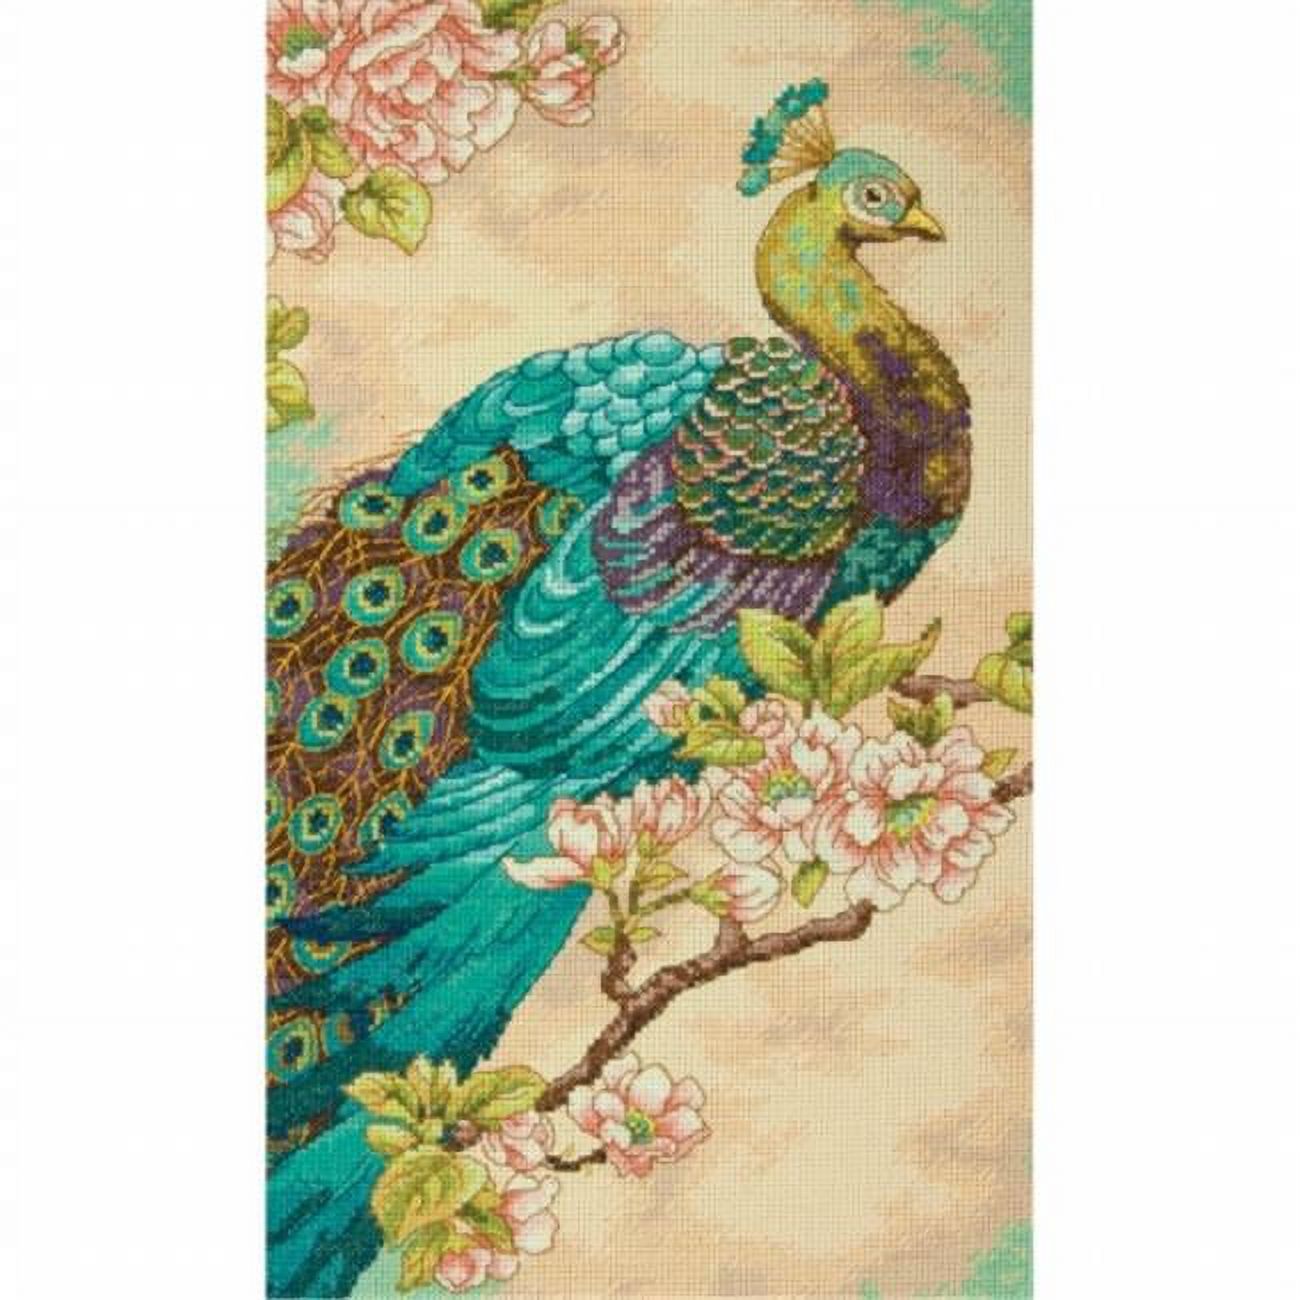 Simplicity Indian Peacock Counted Cross Stitch Kit by Dimensions, 1 Each - image 1 of 2